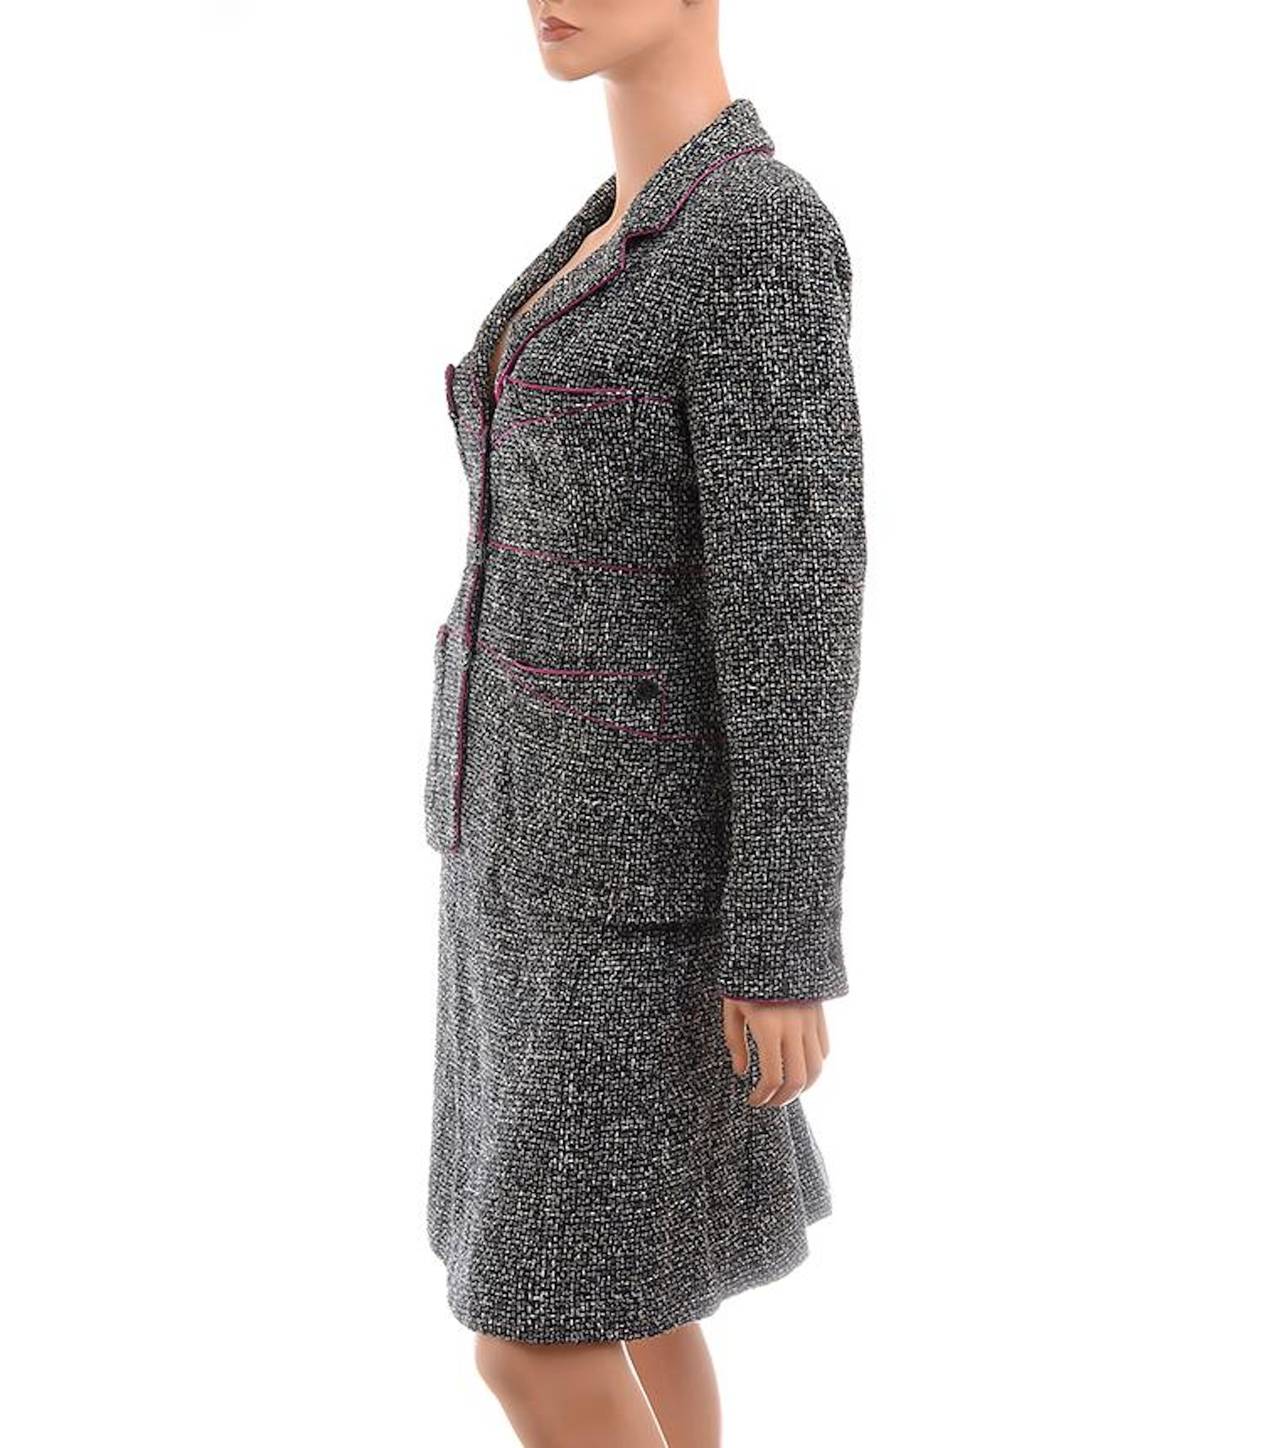 Chanel black and white basket weave patterned boucle skirt suit comprising jacket with allover magenta trim, notch collar and lapels, three front cc logo button closure, four front patch pockets, long sleeve with three buttons on each cuff, and